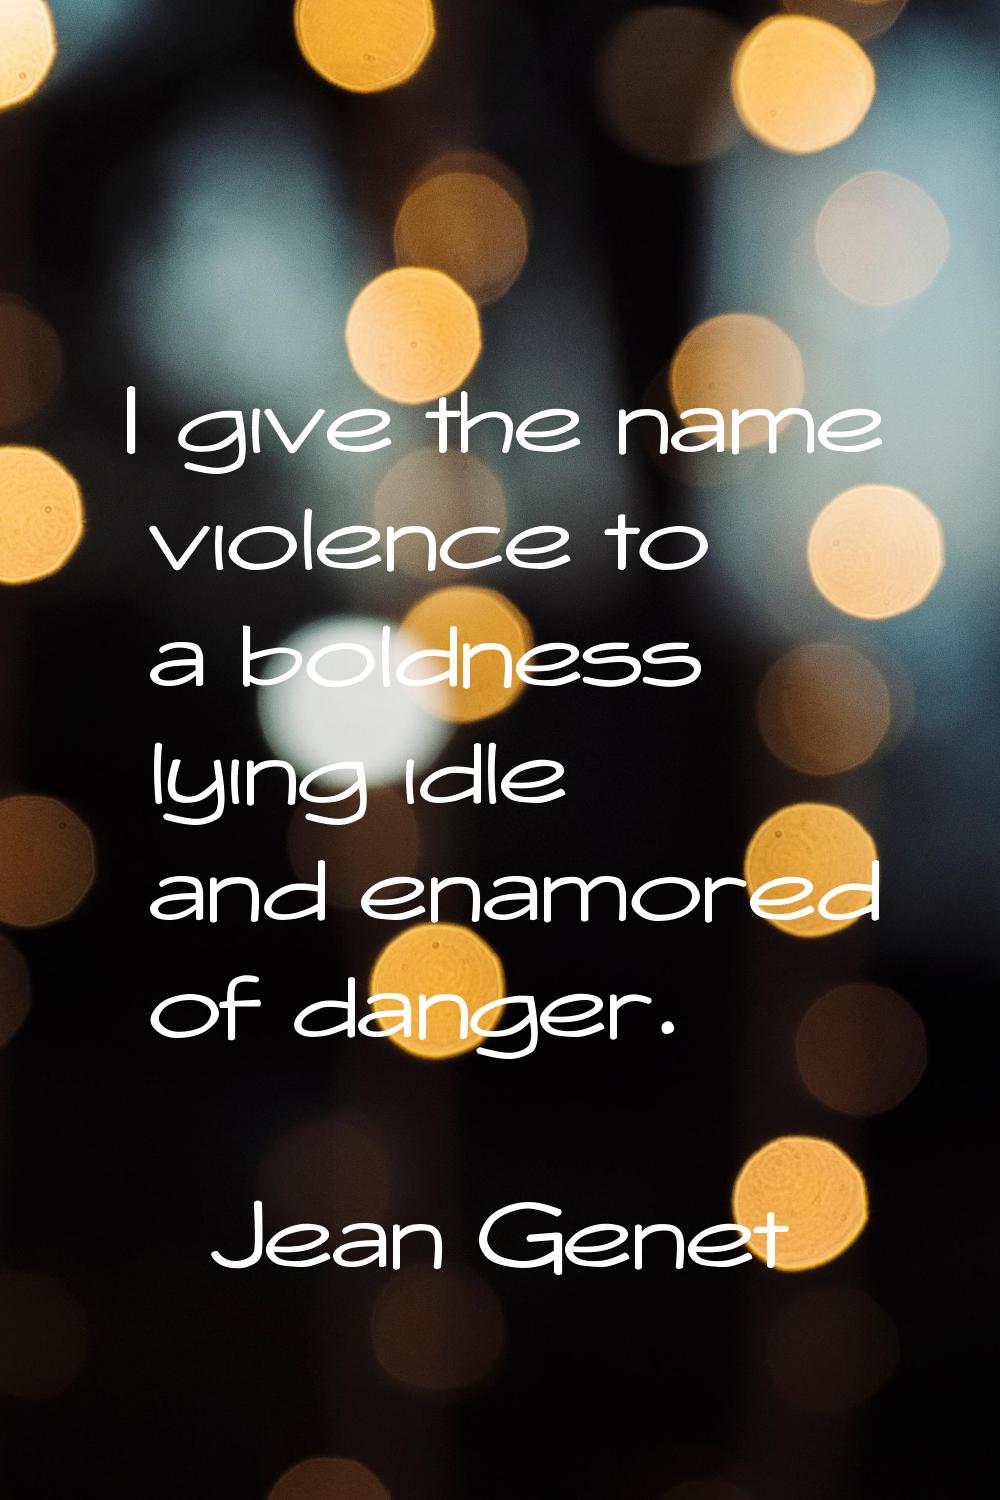 I give the name violence to a boldness lying idle and enamored of danger.